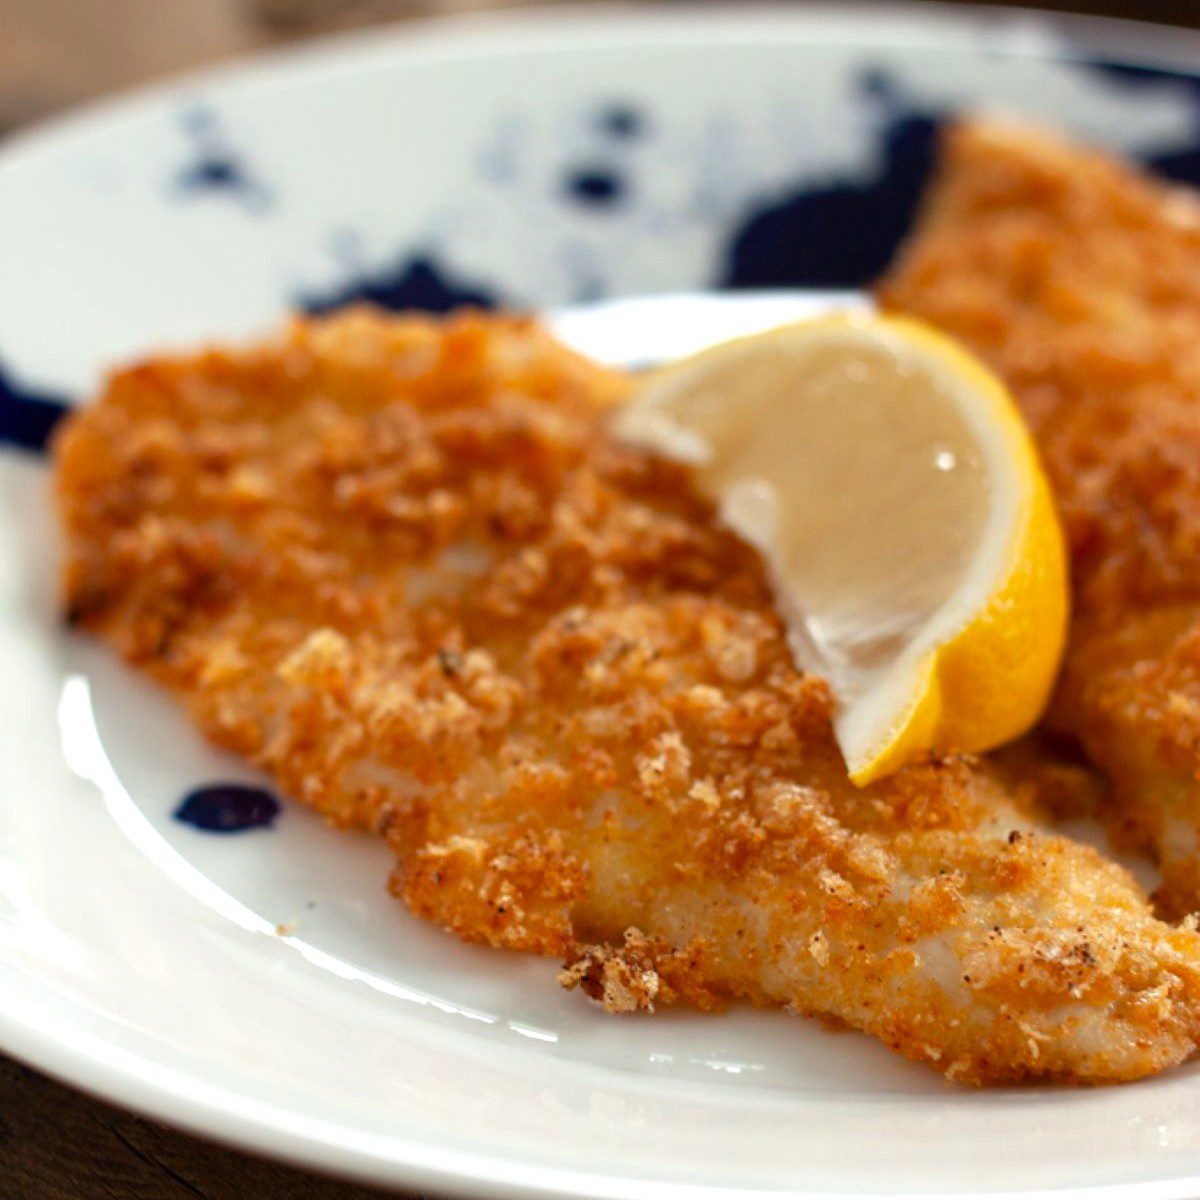 Crispy irregular shaped pieces of golden breaded fish pieces on a white and blue plate.